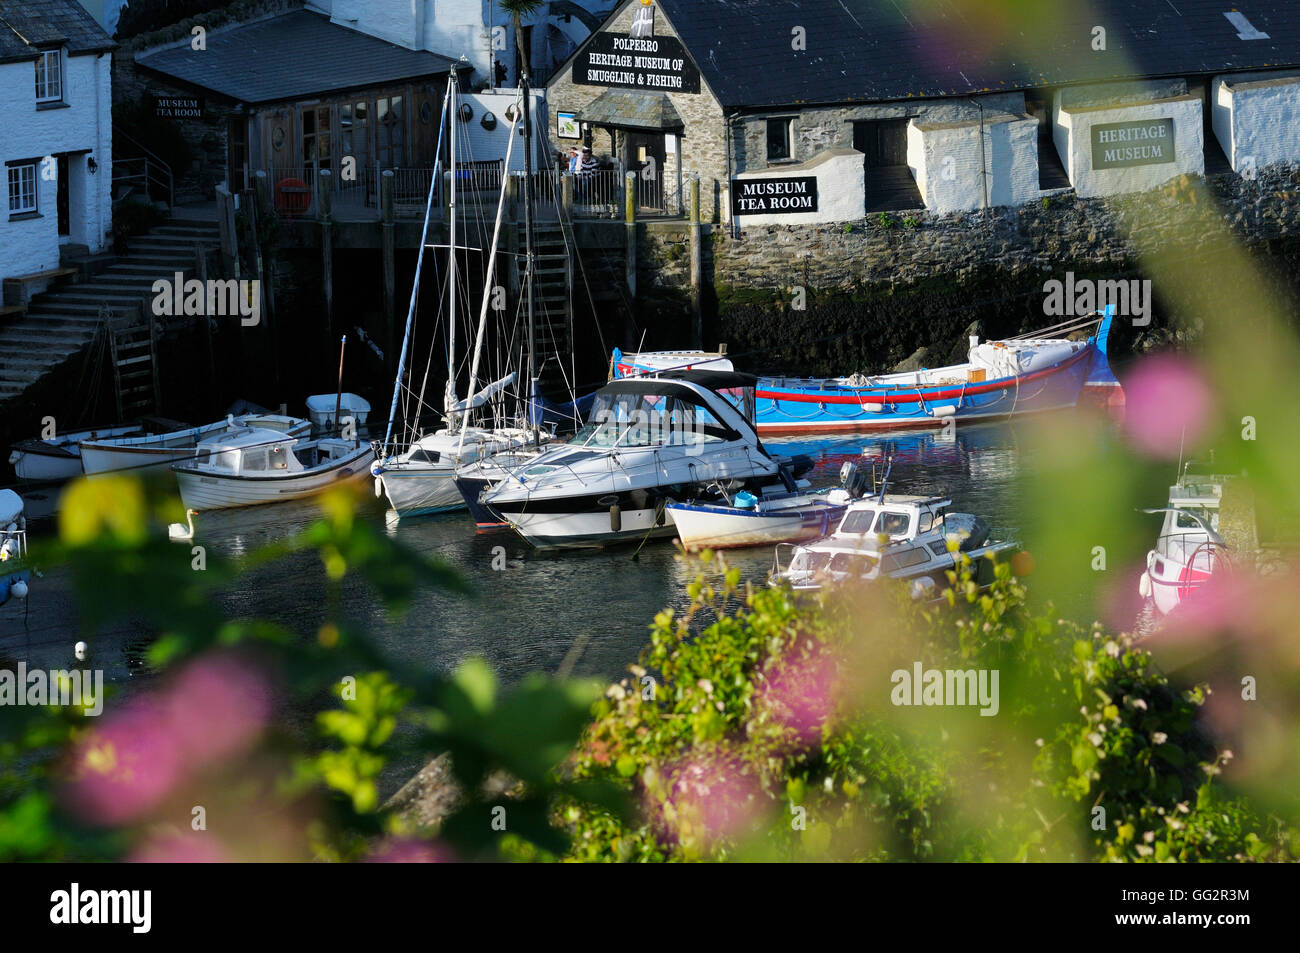 Polperro harbour and Heritage Museum of Smuggling & Fishing, Cornwall, England, UK Stock Photo